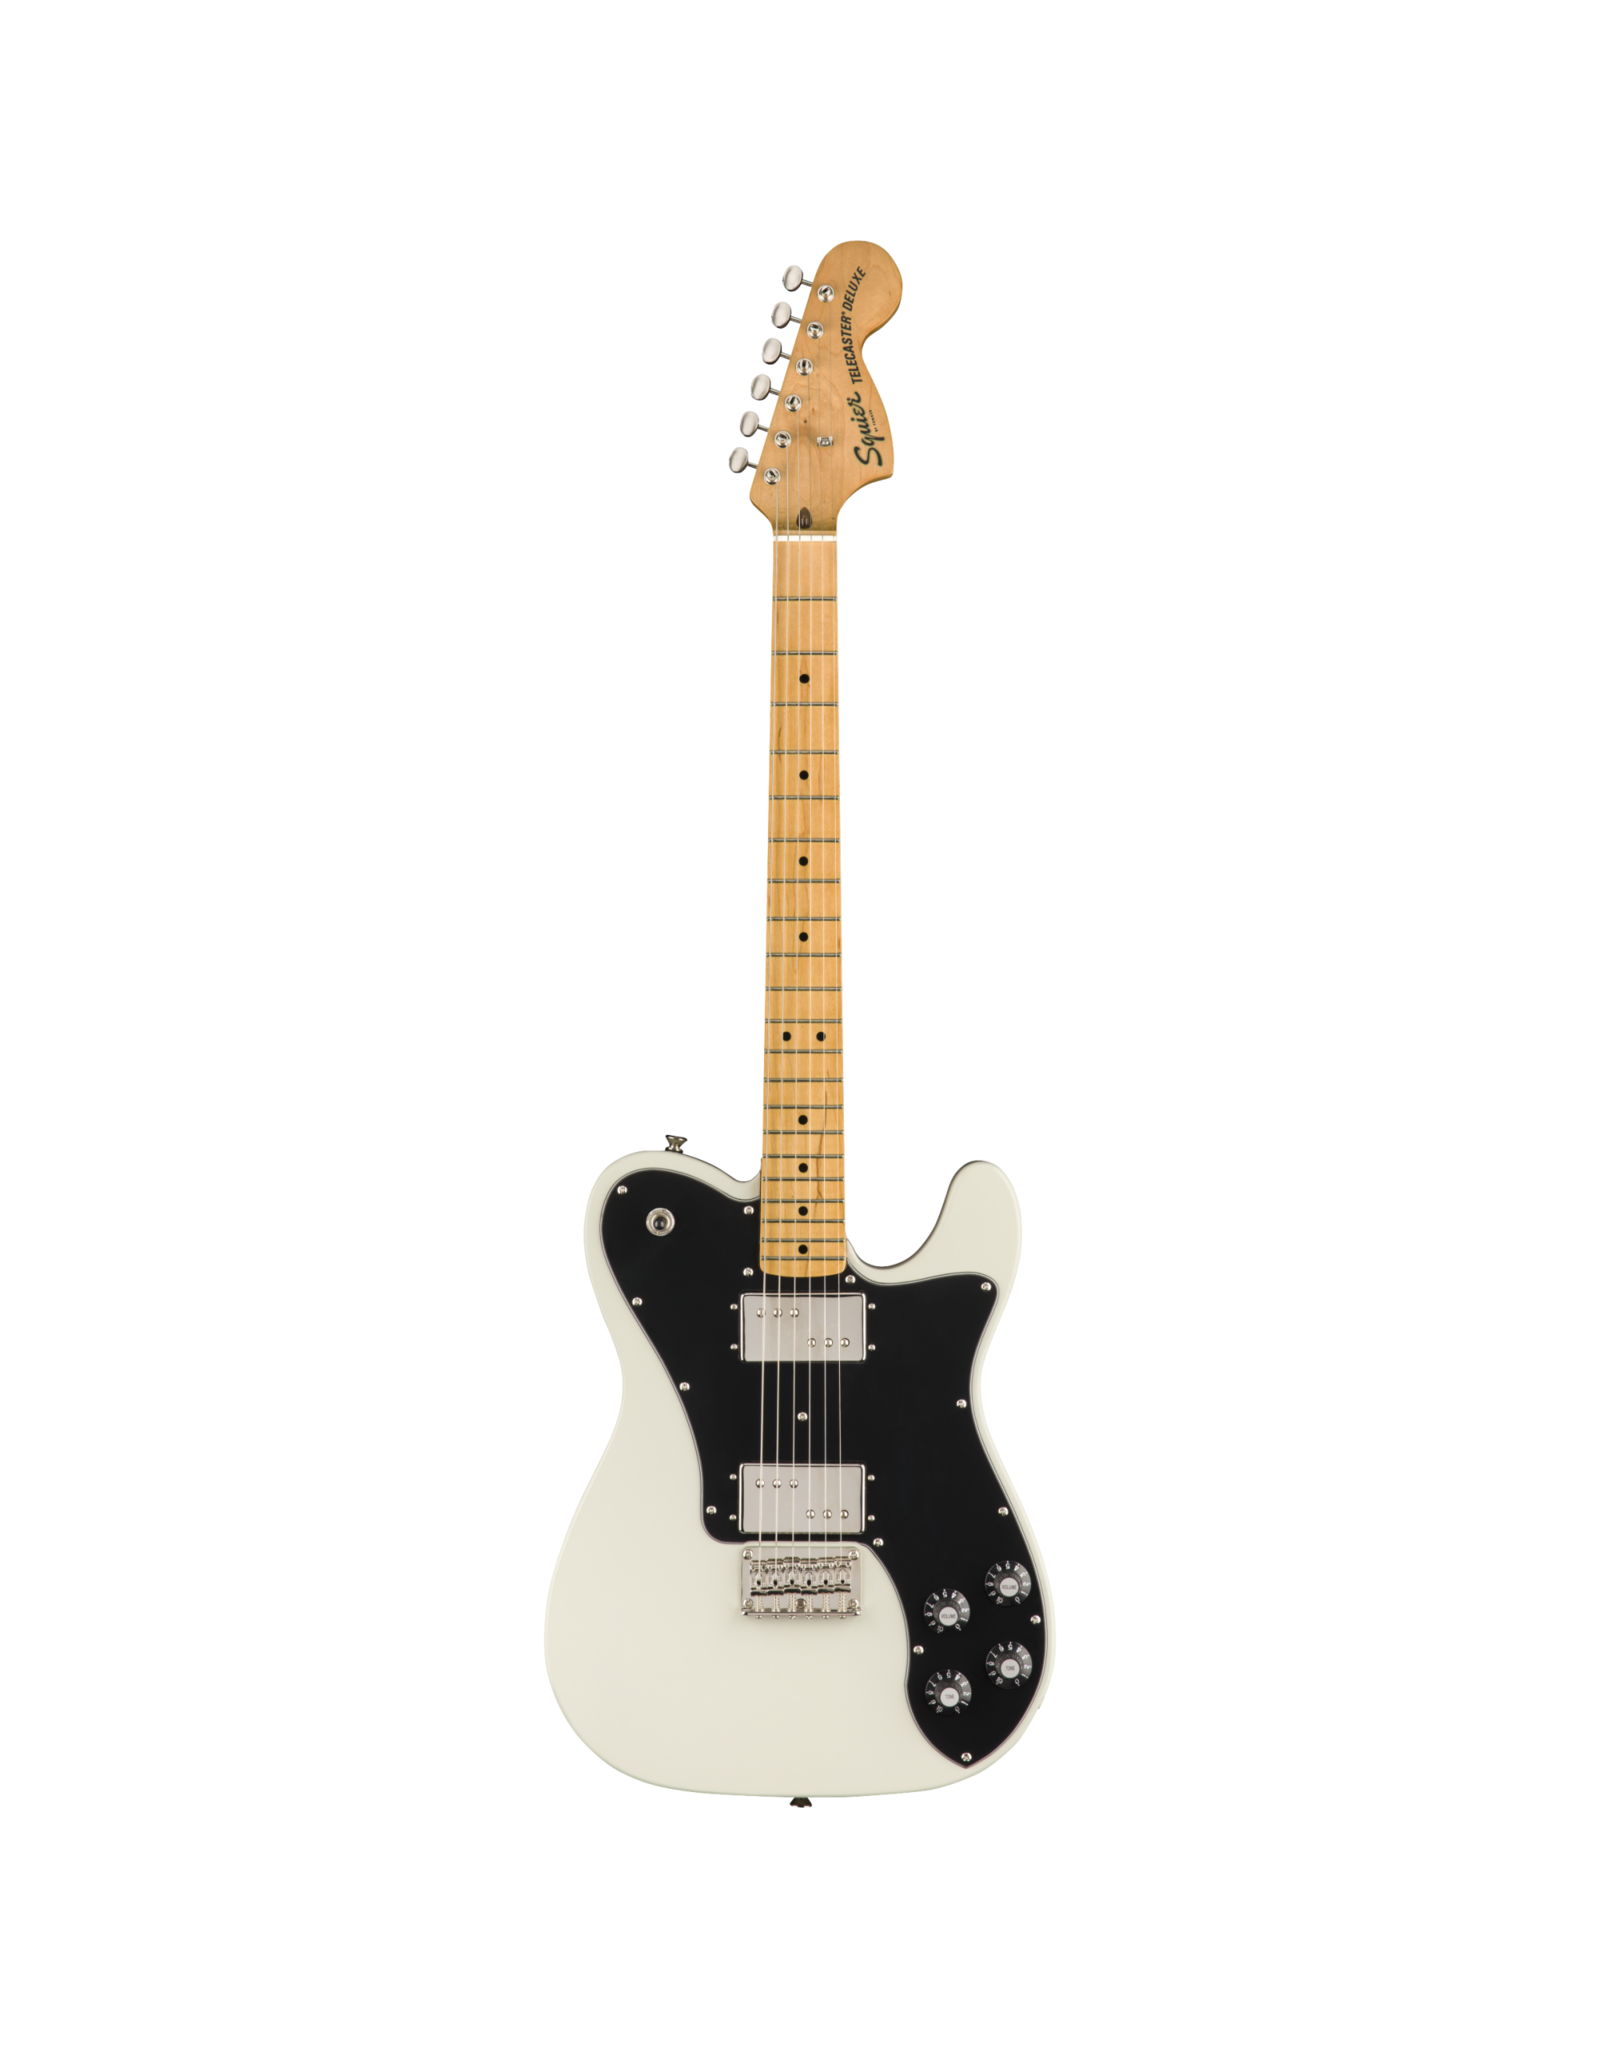 Squier Squier Classic Vibe 70s Telecaster Deluxe, Olympic White, Maple Neck